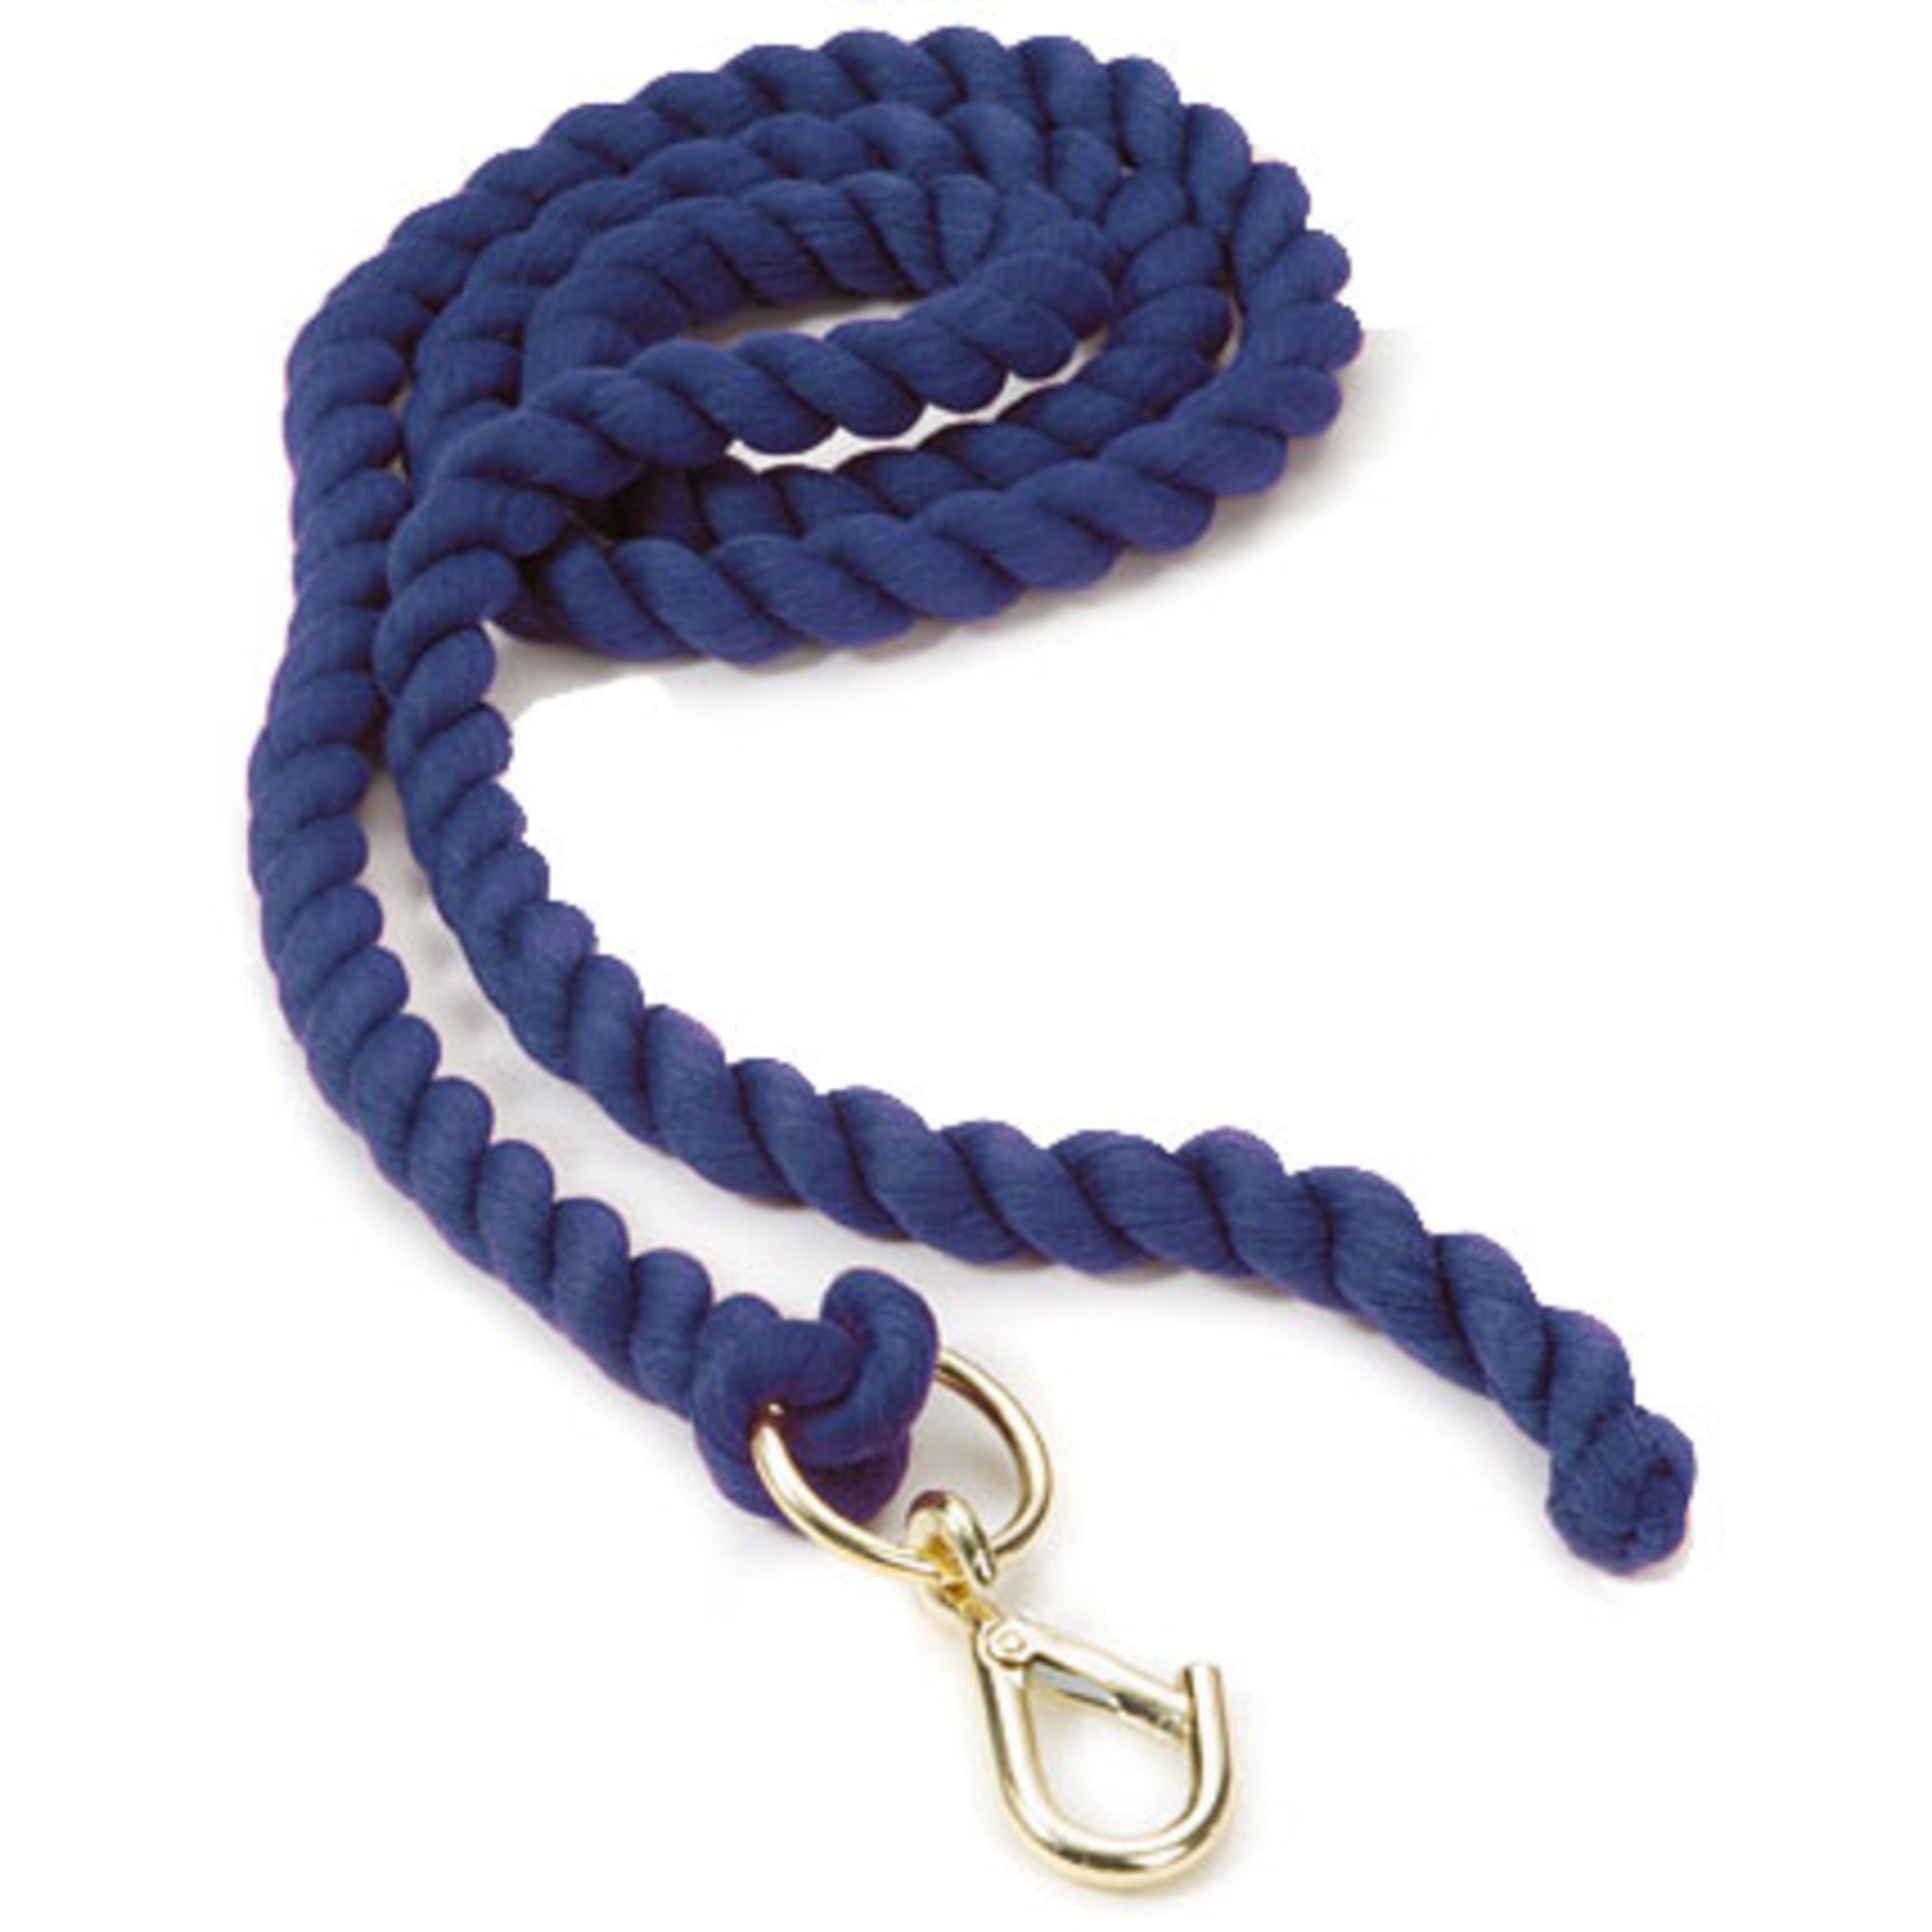 Shires Plain Headcollar Lead Rope Review